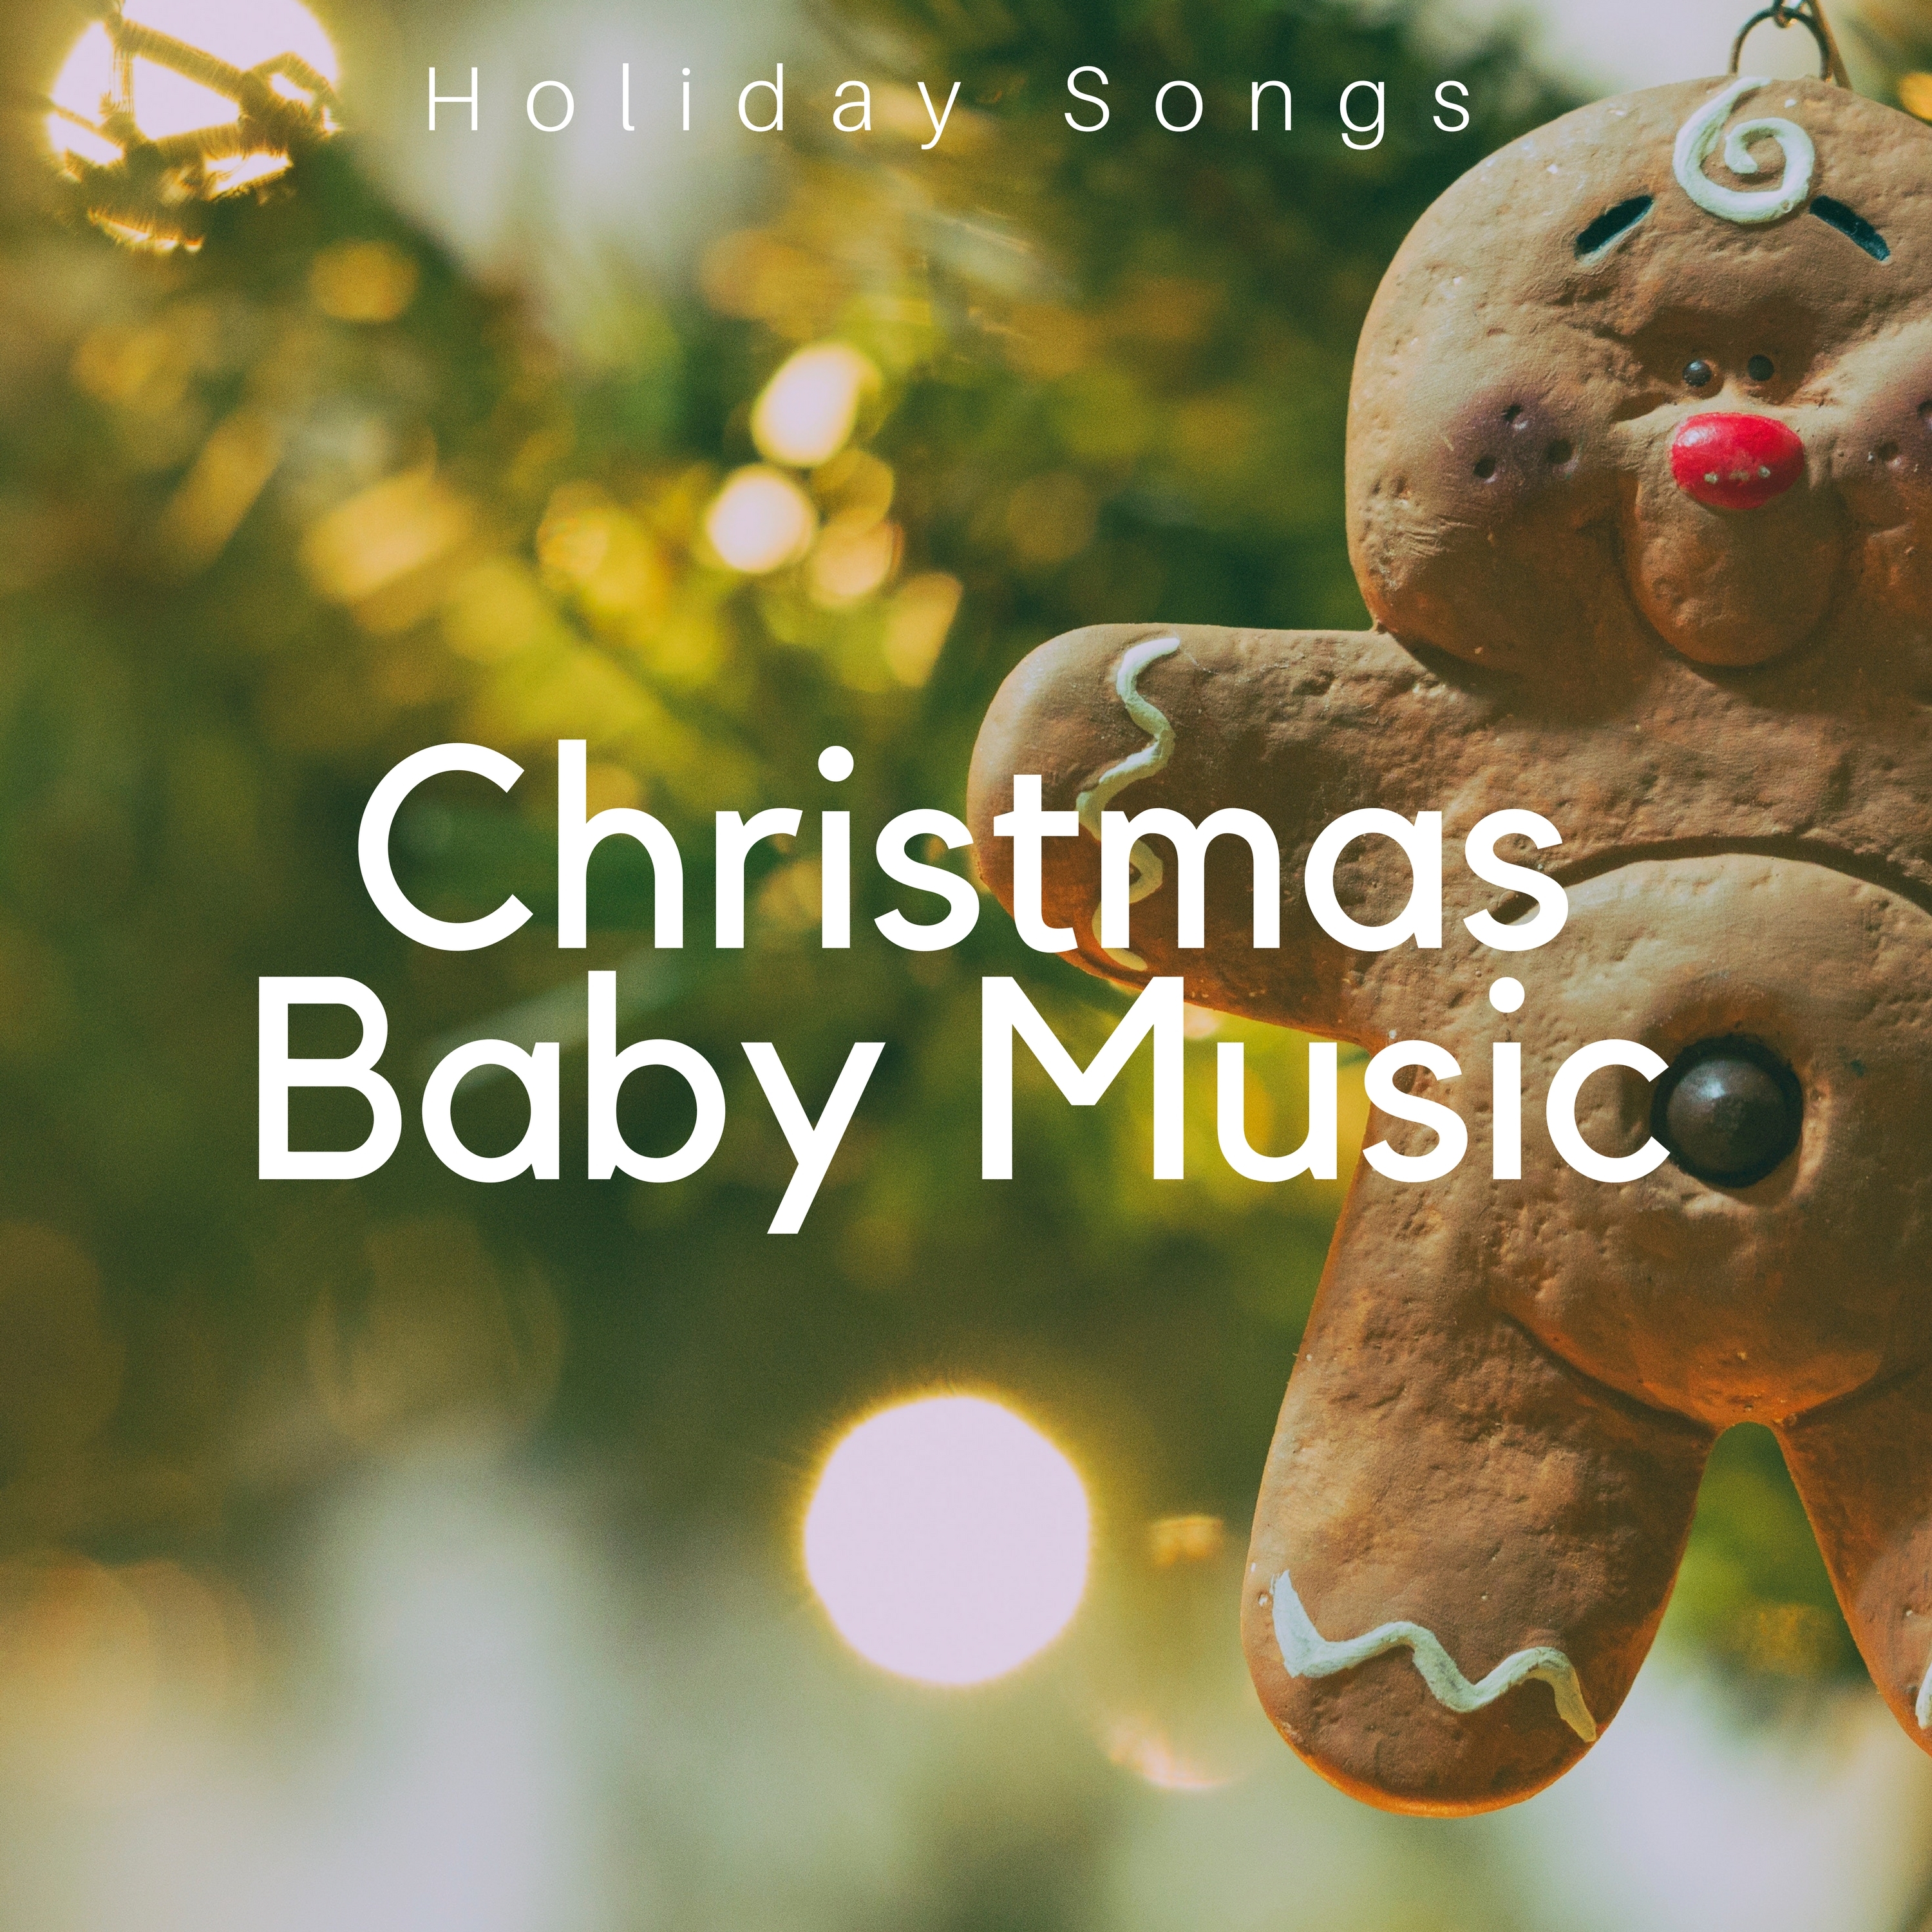 Christmas Baby Music: Holiday Songs to Please Kids and Wish an Happy Christmas